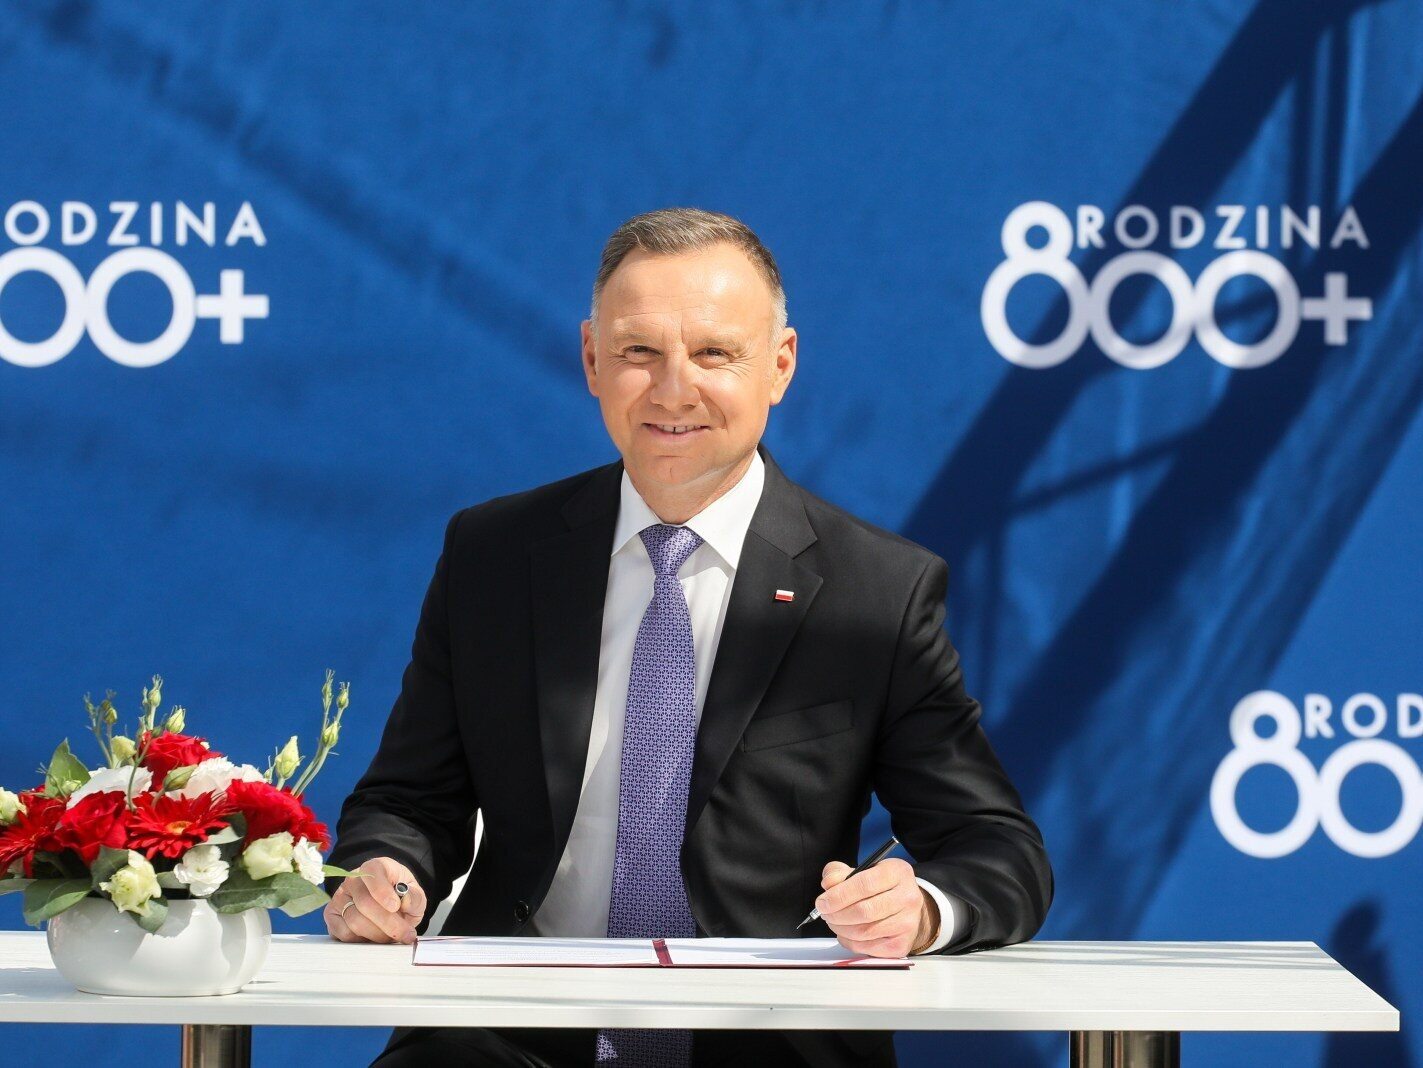 When are the 2023 parliamentary elections?  Andrzej Duda made a decision